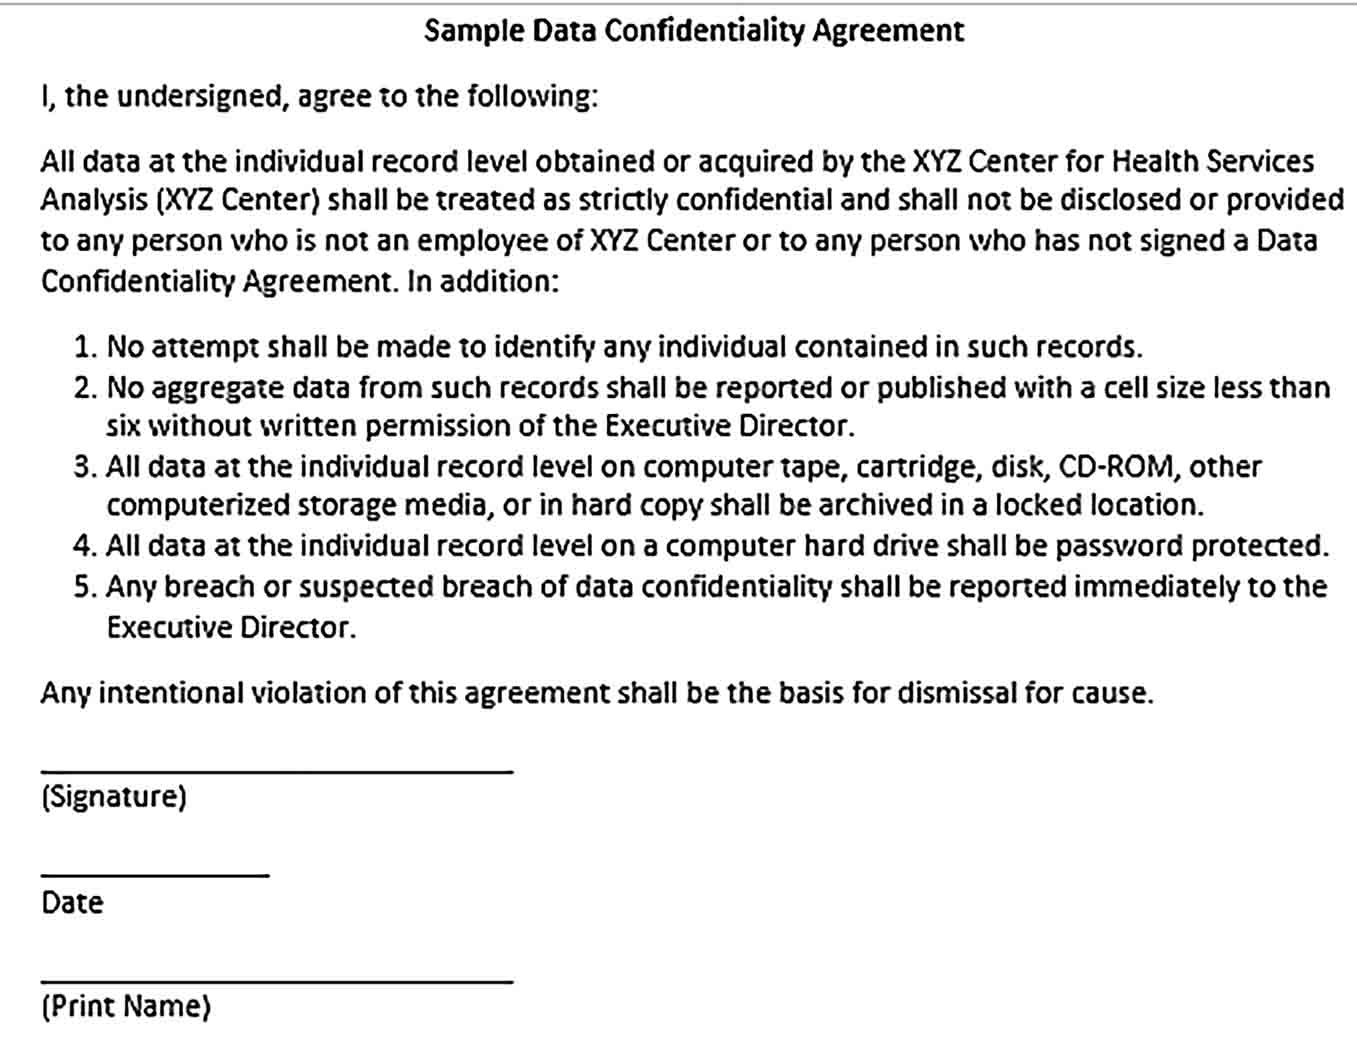 Sample Computer Data Confidentiality Agreement